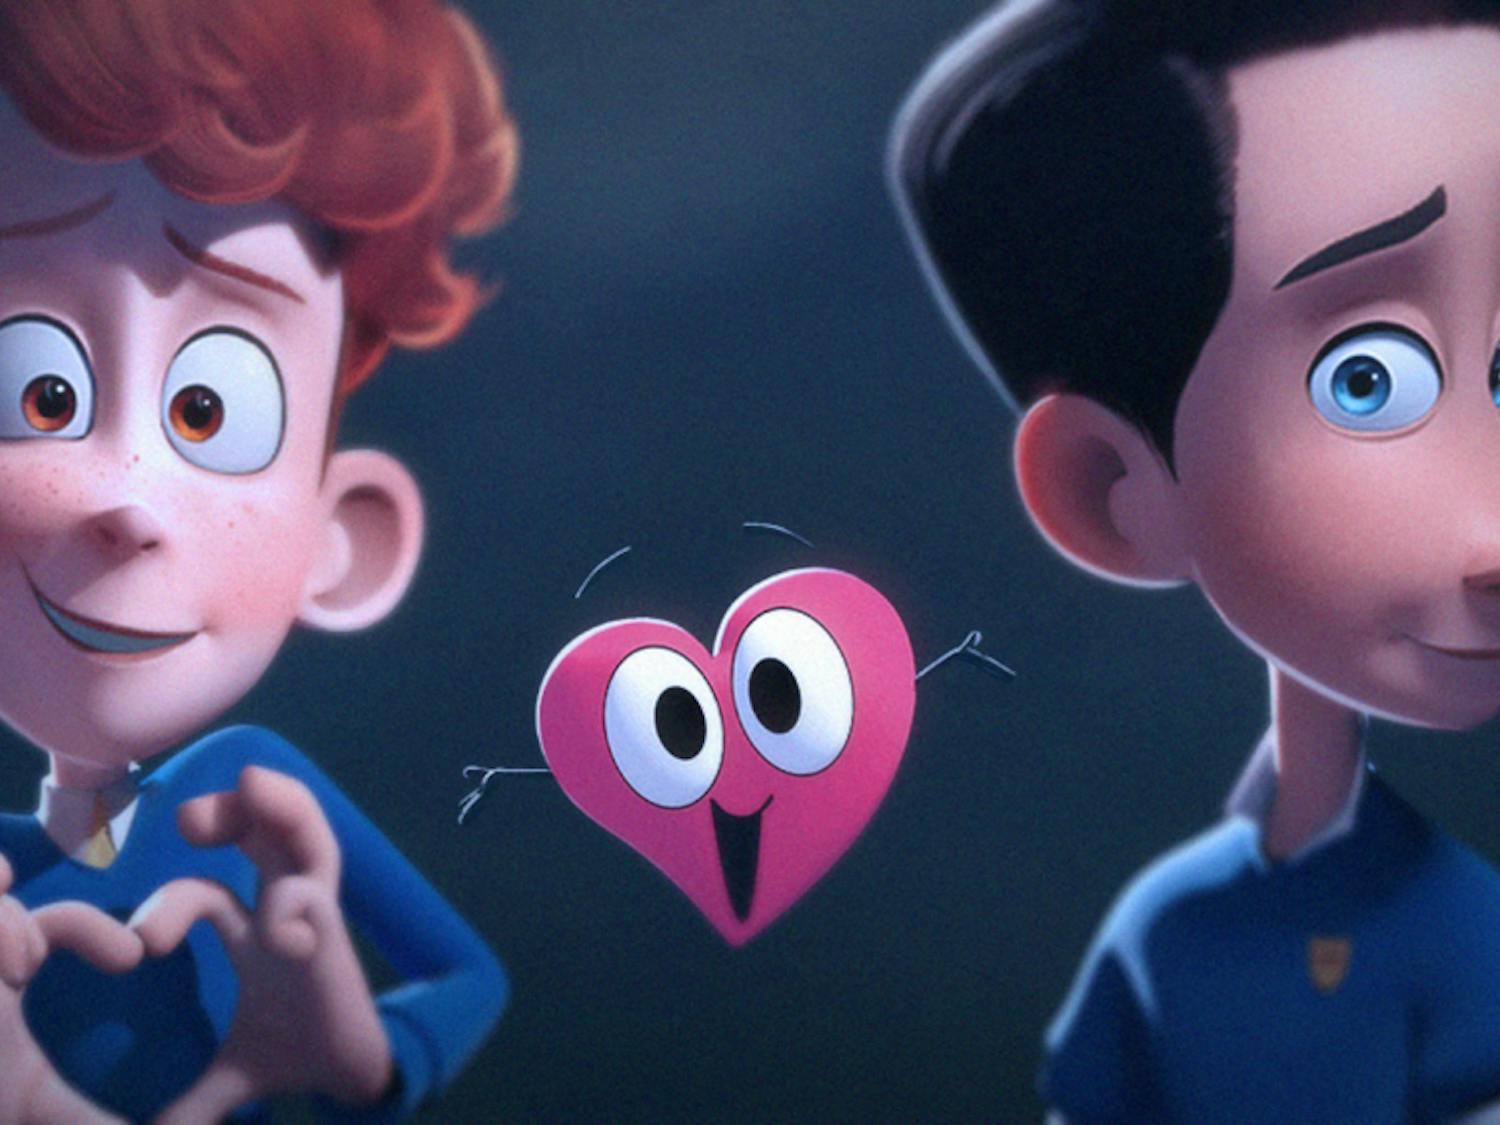 In a&nbsp;Heartbeat tells the story of two boys who fall in love at first sight. (PROVIDED via Kickstarter)